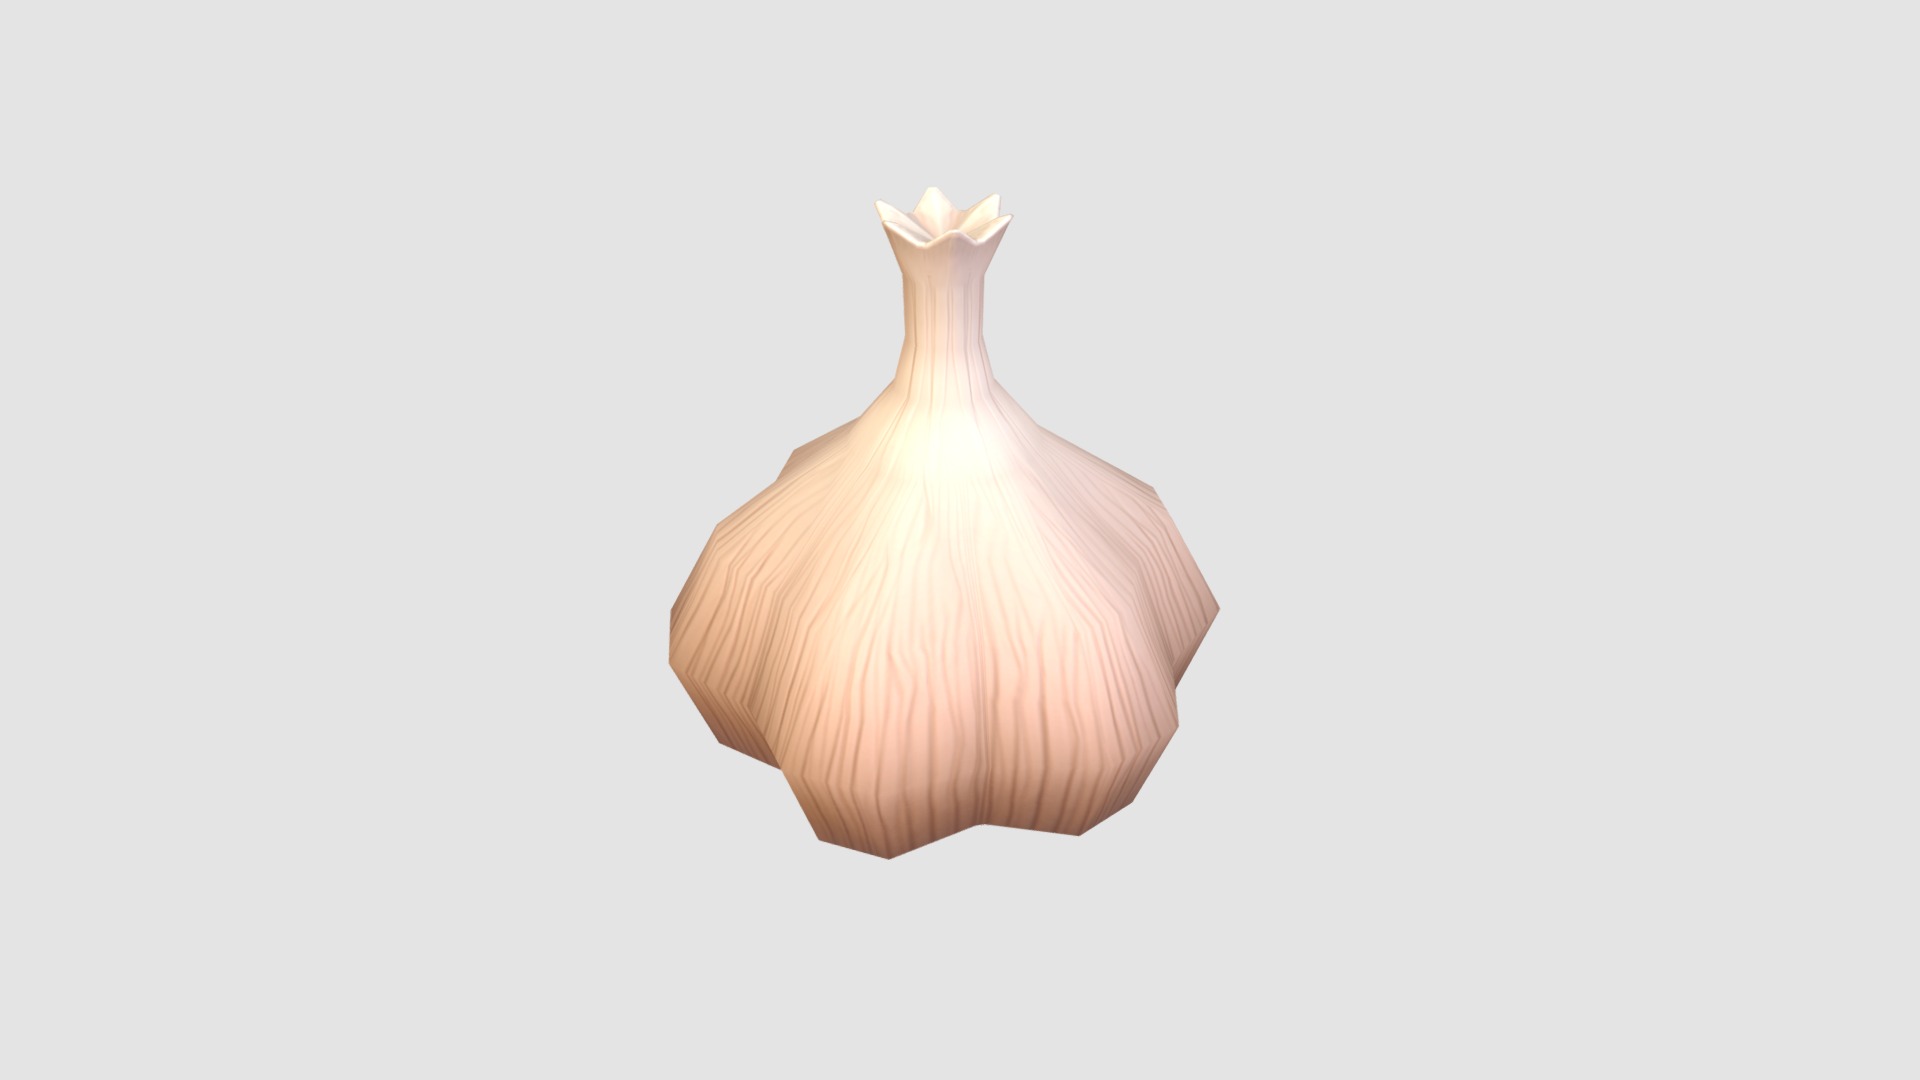 3D model Garlic - This is a 3D model of the Garlic. The 3D model is about a pink and white vase.